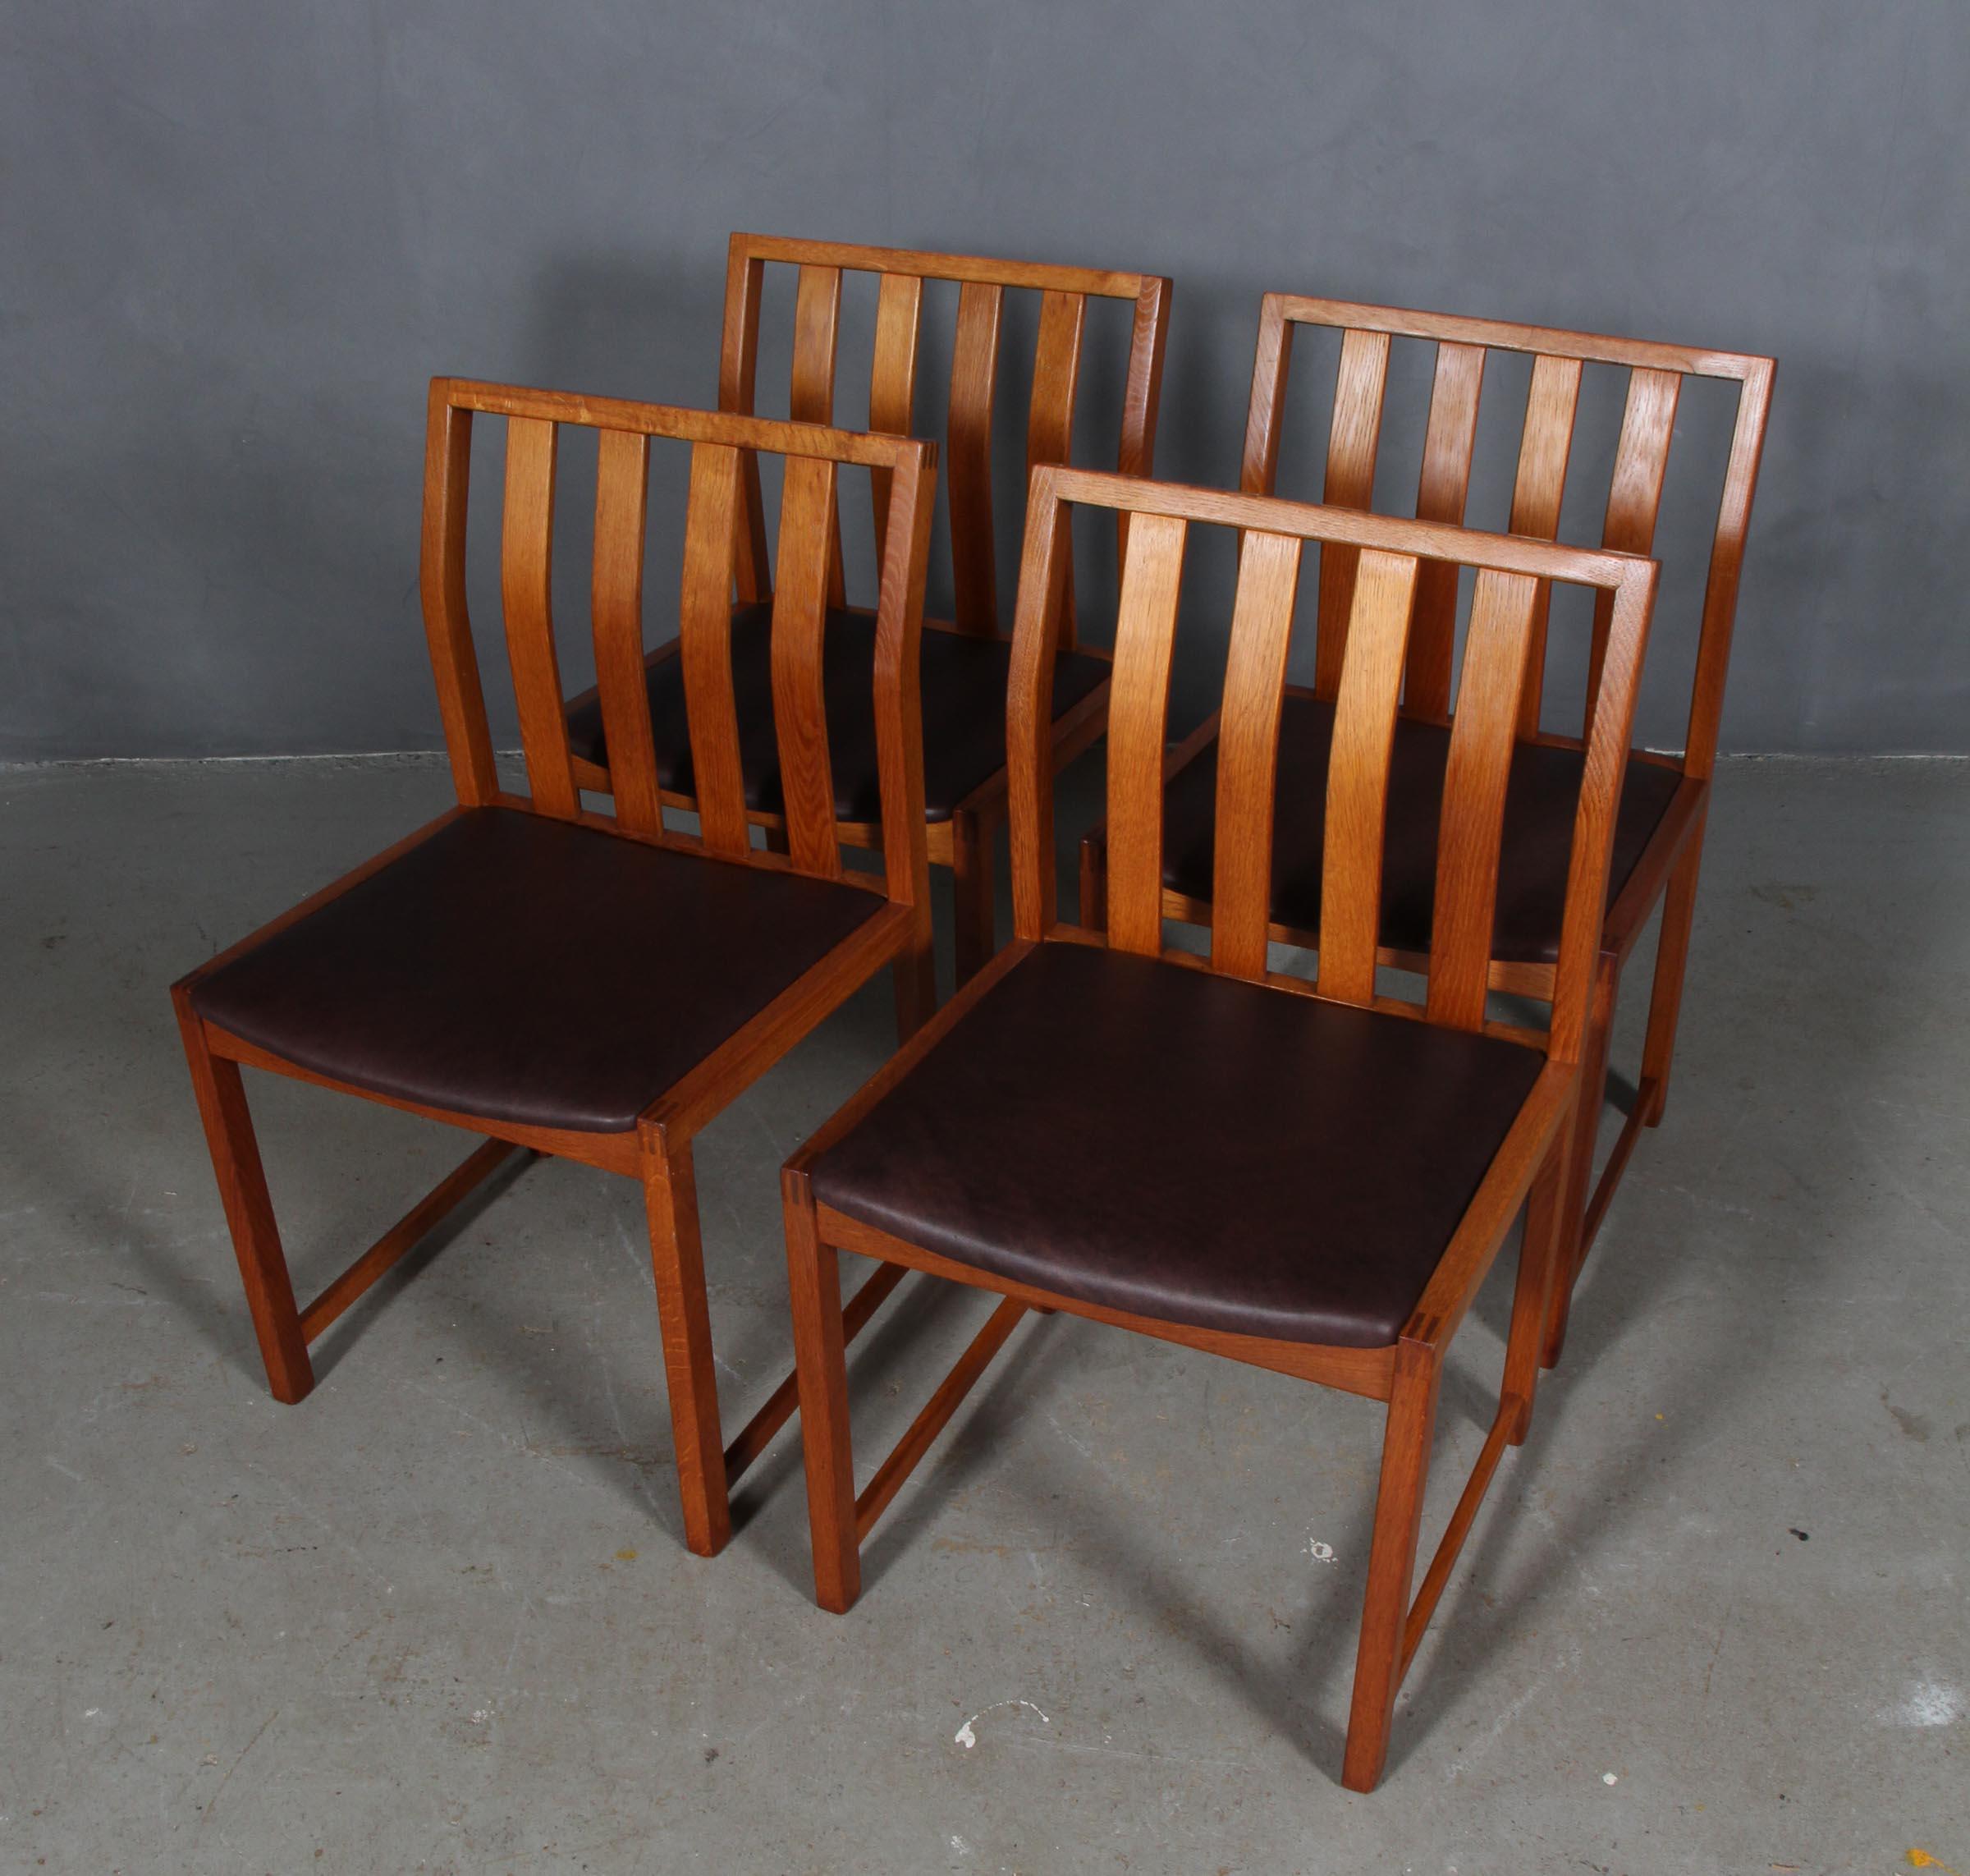 Steen Eiler Rasmussen set of four dining chairs in teak.

Seat new upholstered with mokka aniline leather.